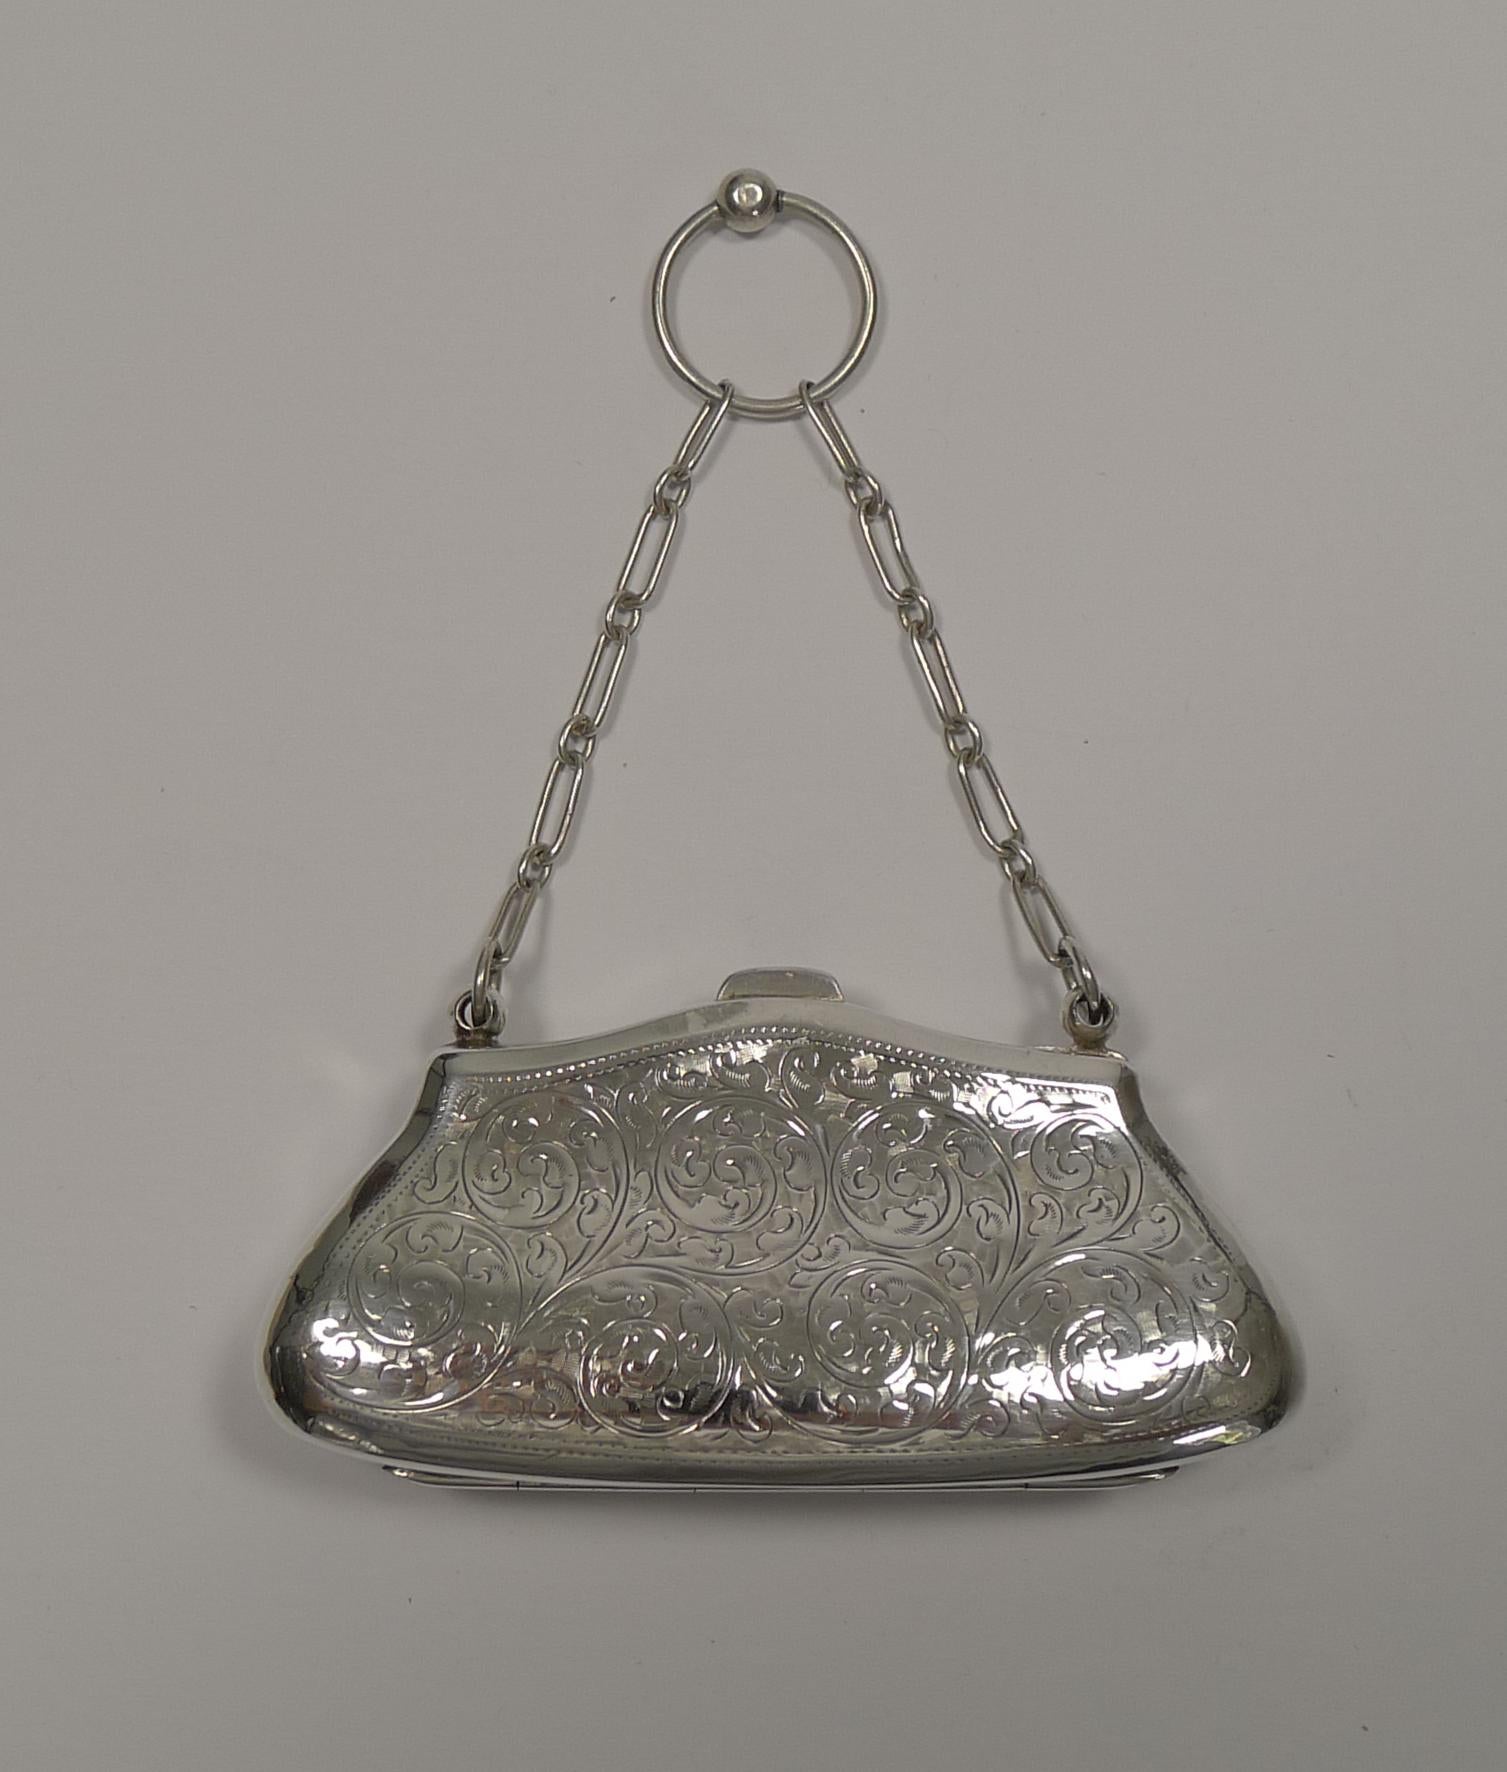 A wonderful and very elegant coin purse, made from English Sterling silver fully hallmarked for Birmingham 1913; the makers mark is also present for the silversmith, Joseph Cook & Son Ltd.

The front is decorated with engraving surrounding a